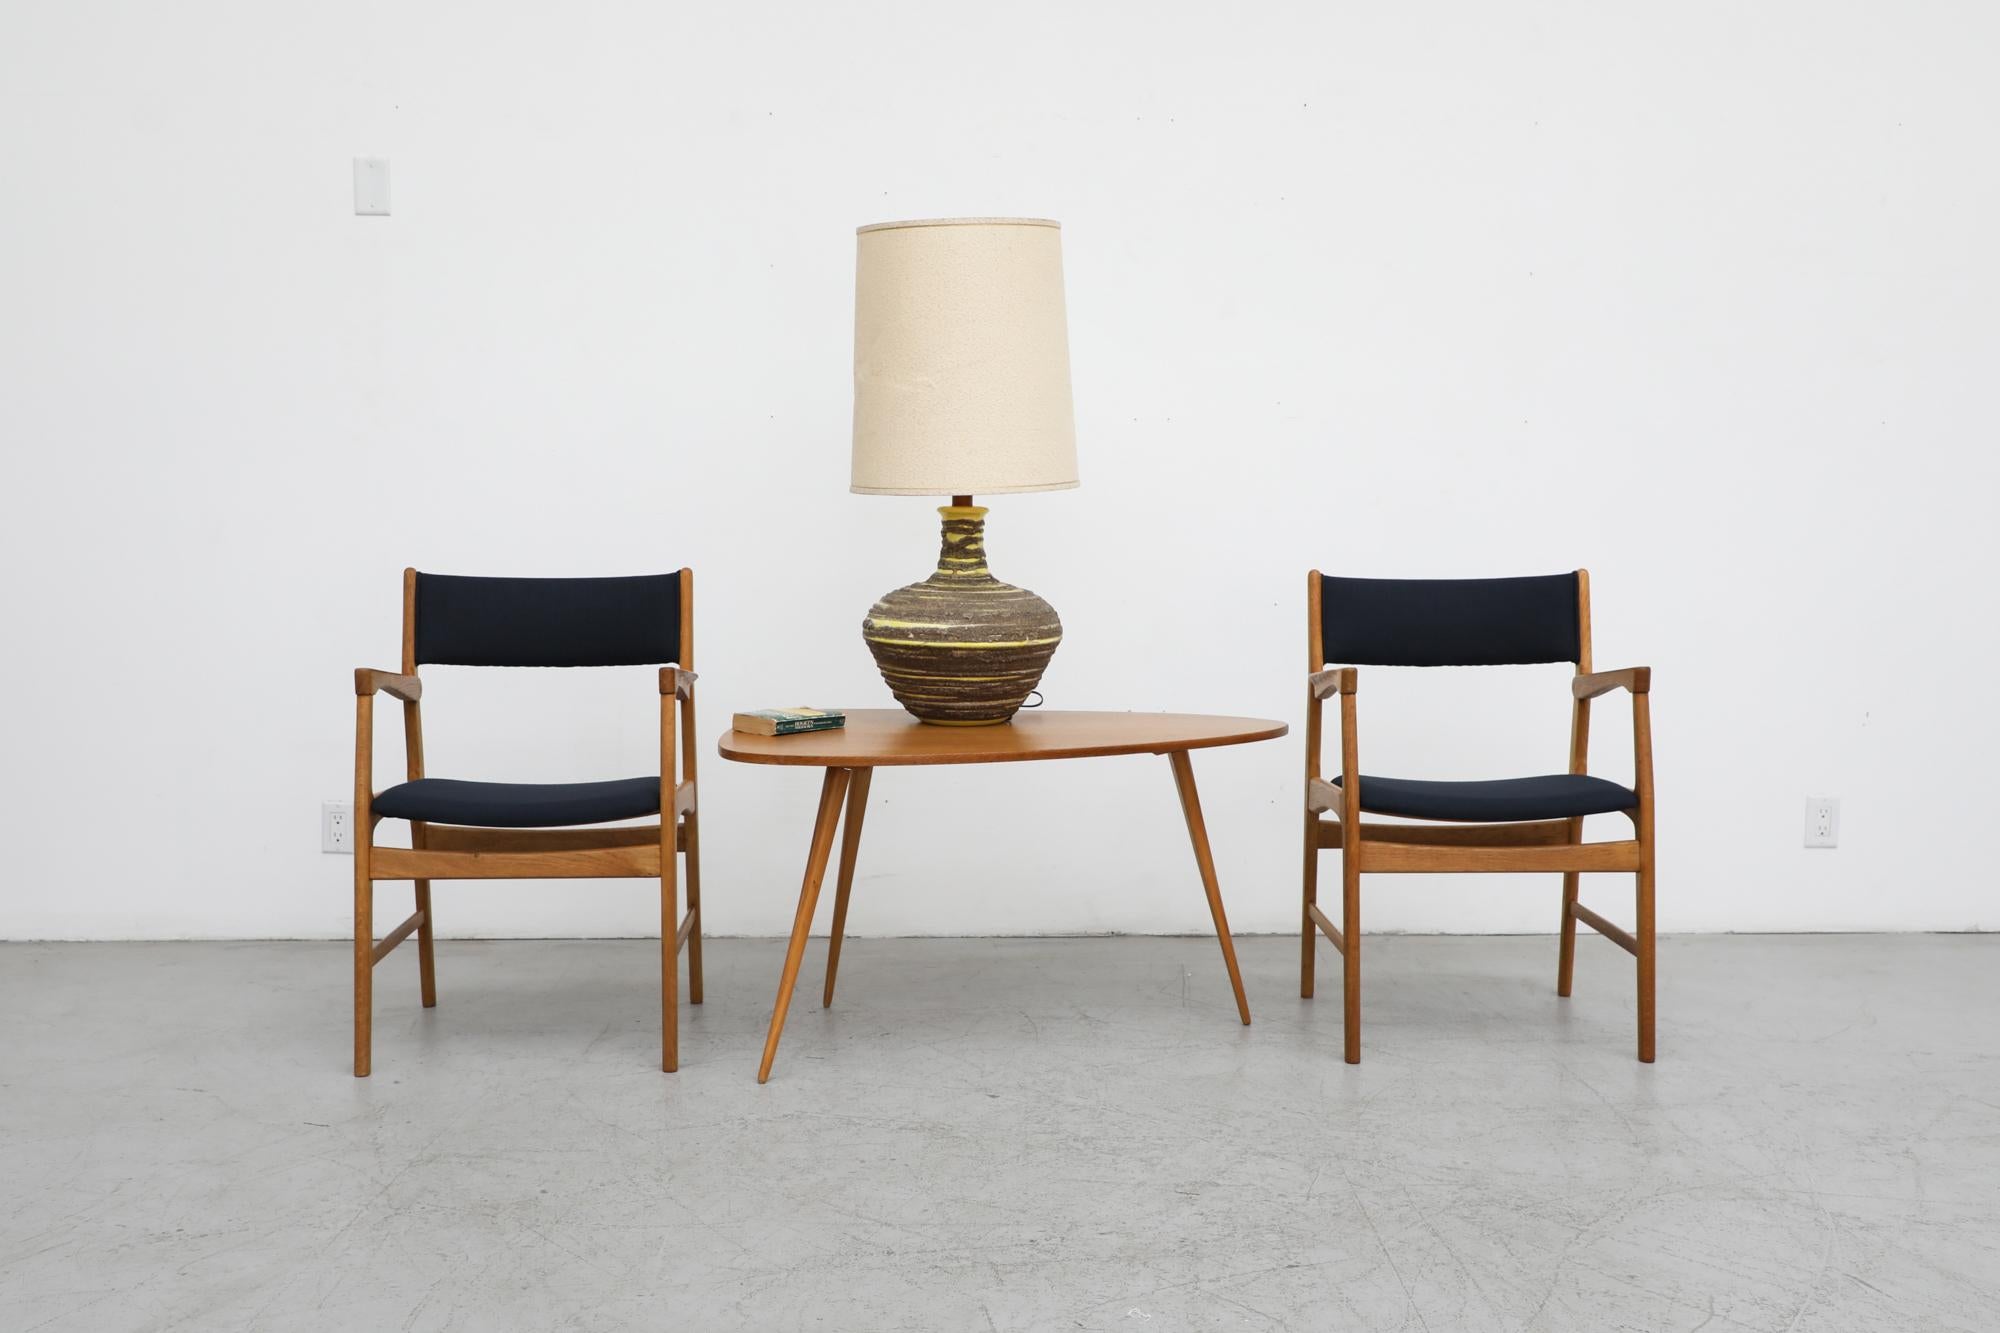 Pair of midcentury Danish oak armchairs in the style of Hans Wegner. These chairs have solid oak frames, delicately carved armrests and newly upholstered black fabric seating. The frames are in good original condition with wear consistent with their